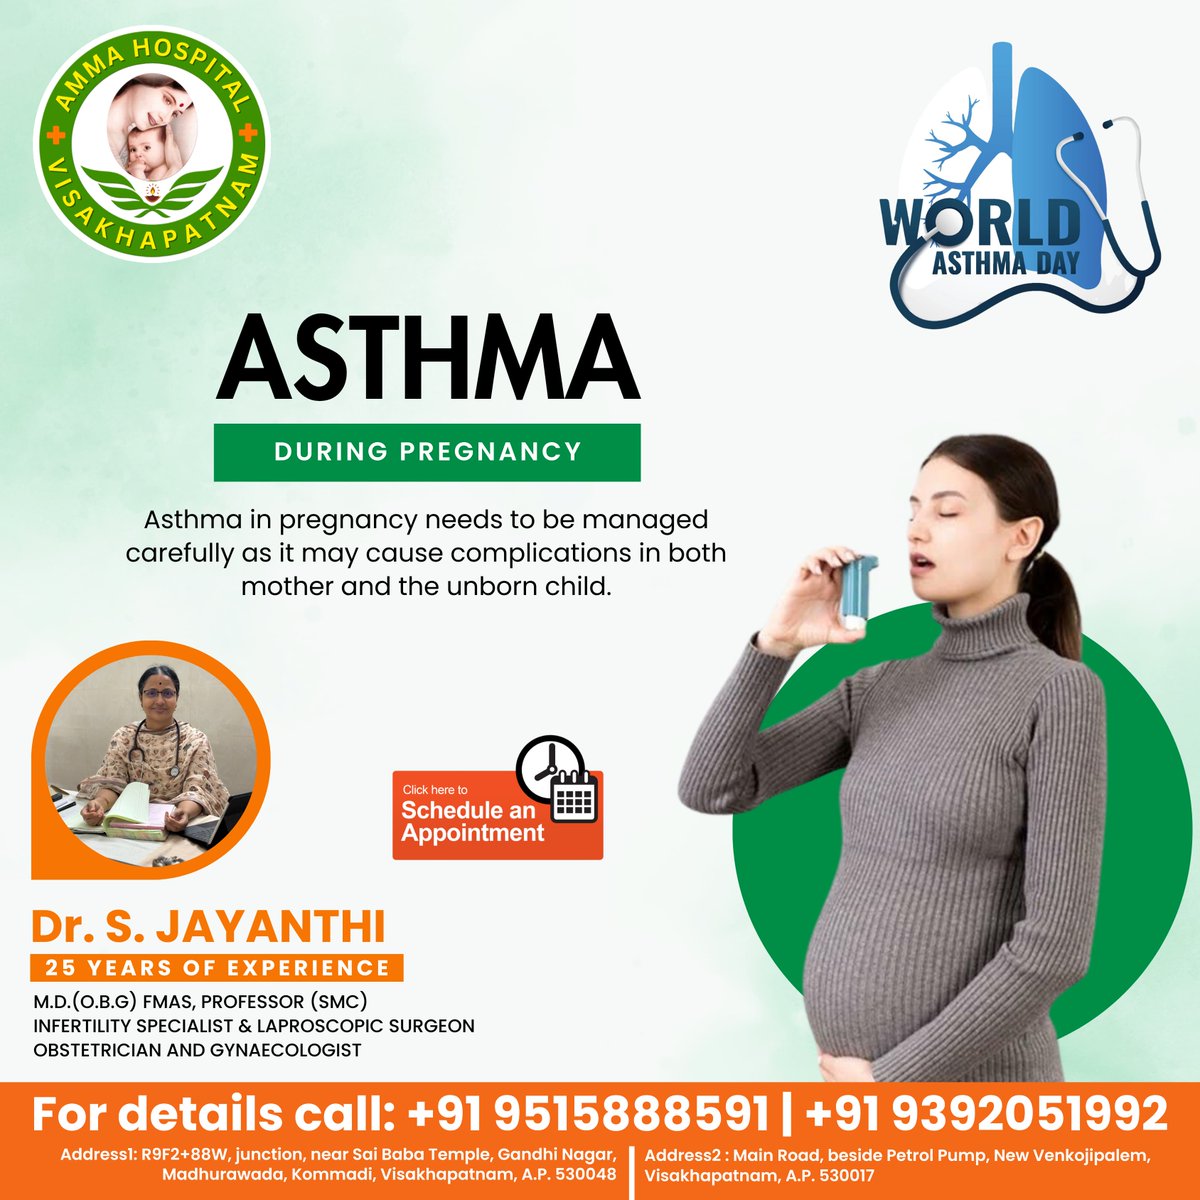 WORLD ASTHMA DAY
Asthma in pregnancy needs to be managed carefully as it may cause complications in both mother and the unborn child.

📞 Contacts : +91 9515888591 | +91 9392051992 

#AmmaHospital #BestGynaecologyHospital #BestGynaecologyDoctor #BestHospitalinVizag